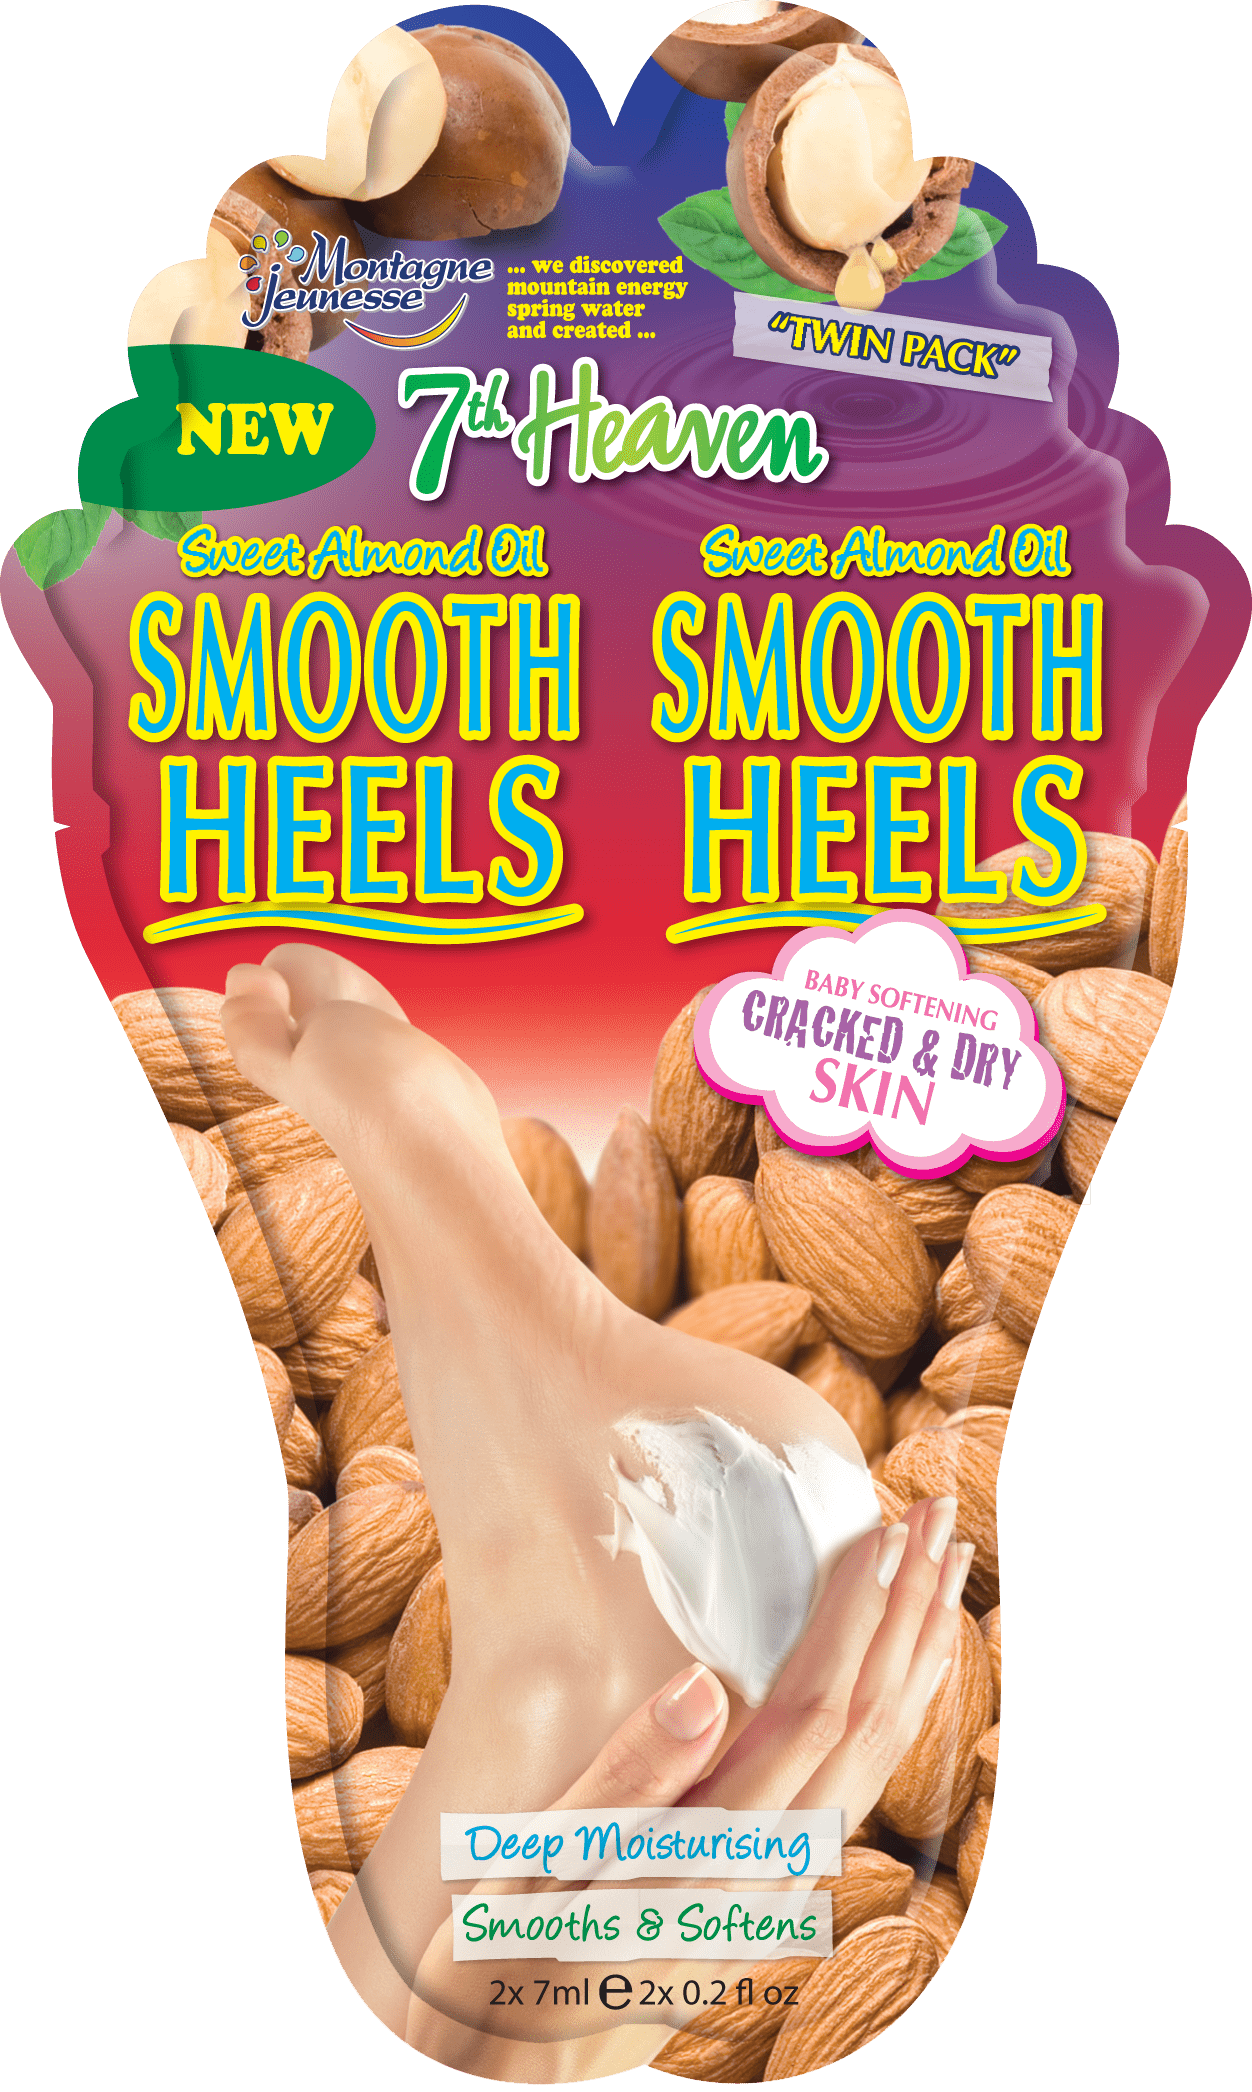 7th Heaven 'Smooth Heels' Nourishing Foot Balm with Sweet Almond Oil and Shea Butter to Deeply Moisturise, Smooth and Soften Cracked and Dry Feet